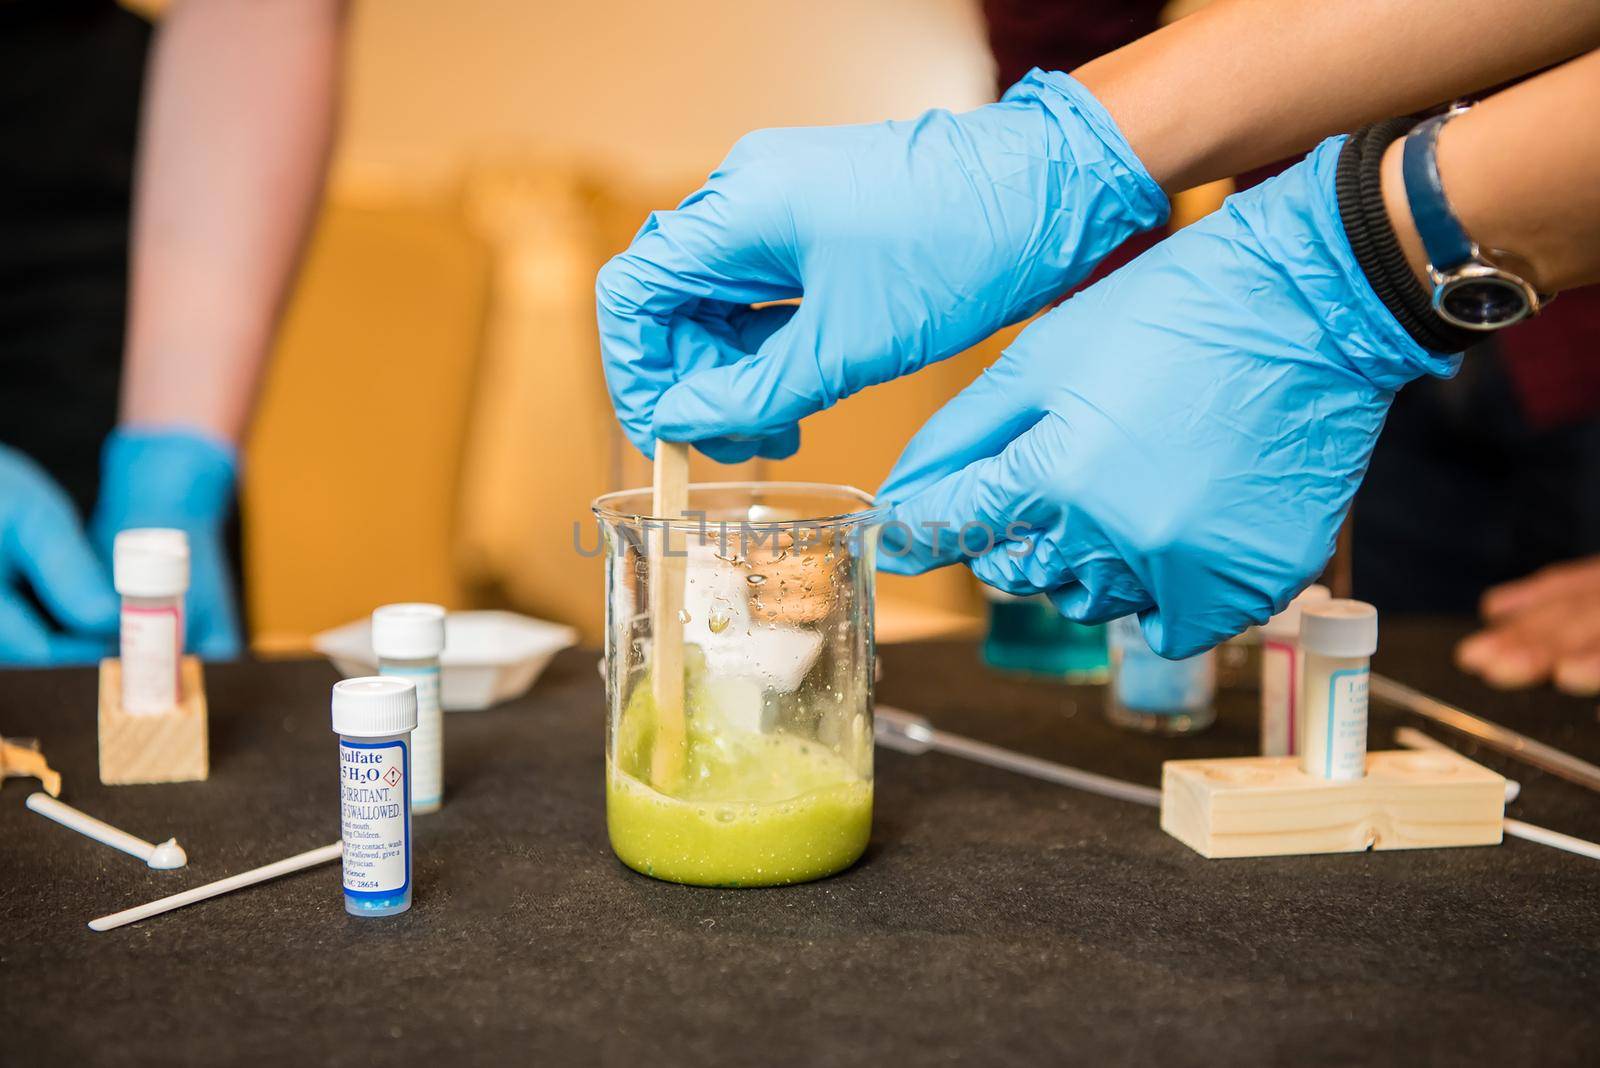 Up close view of young scientist wearing blue latex gloves stirring green liquid in a chemistry glass with surrounding vials for testing.